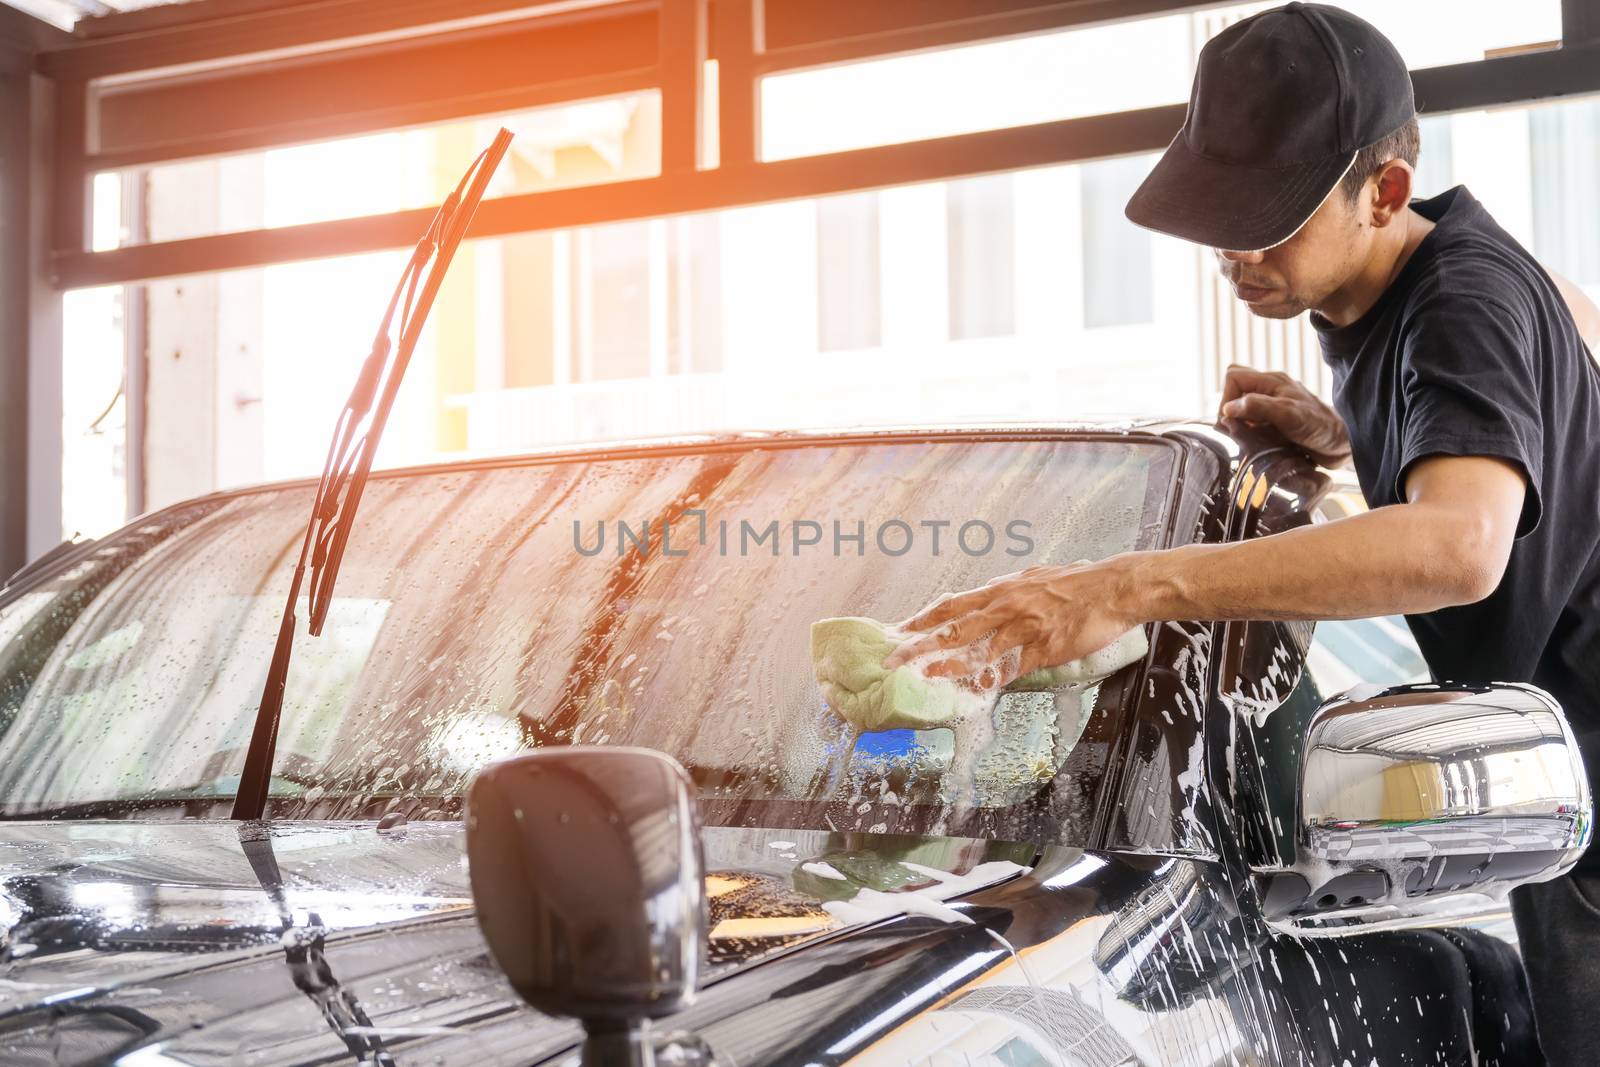 Car wash worker wearing a T-shirt and a black cap is using a sponge to clean the car in the car wash center, concept for car care industry.